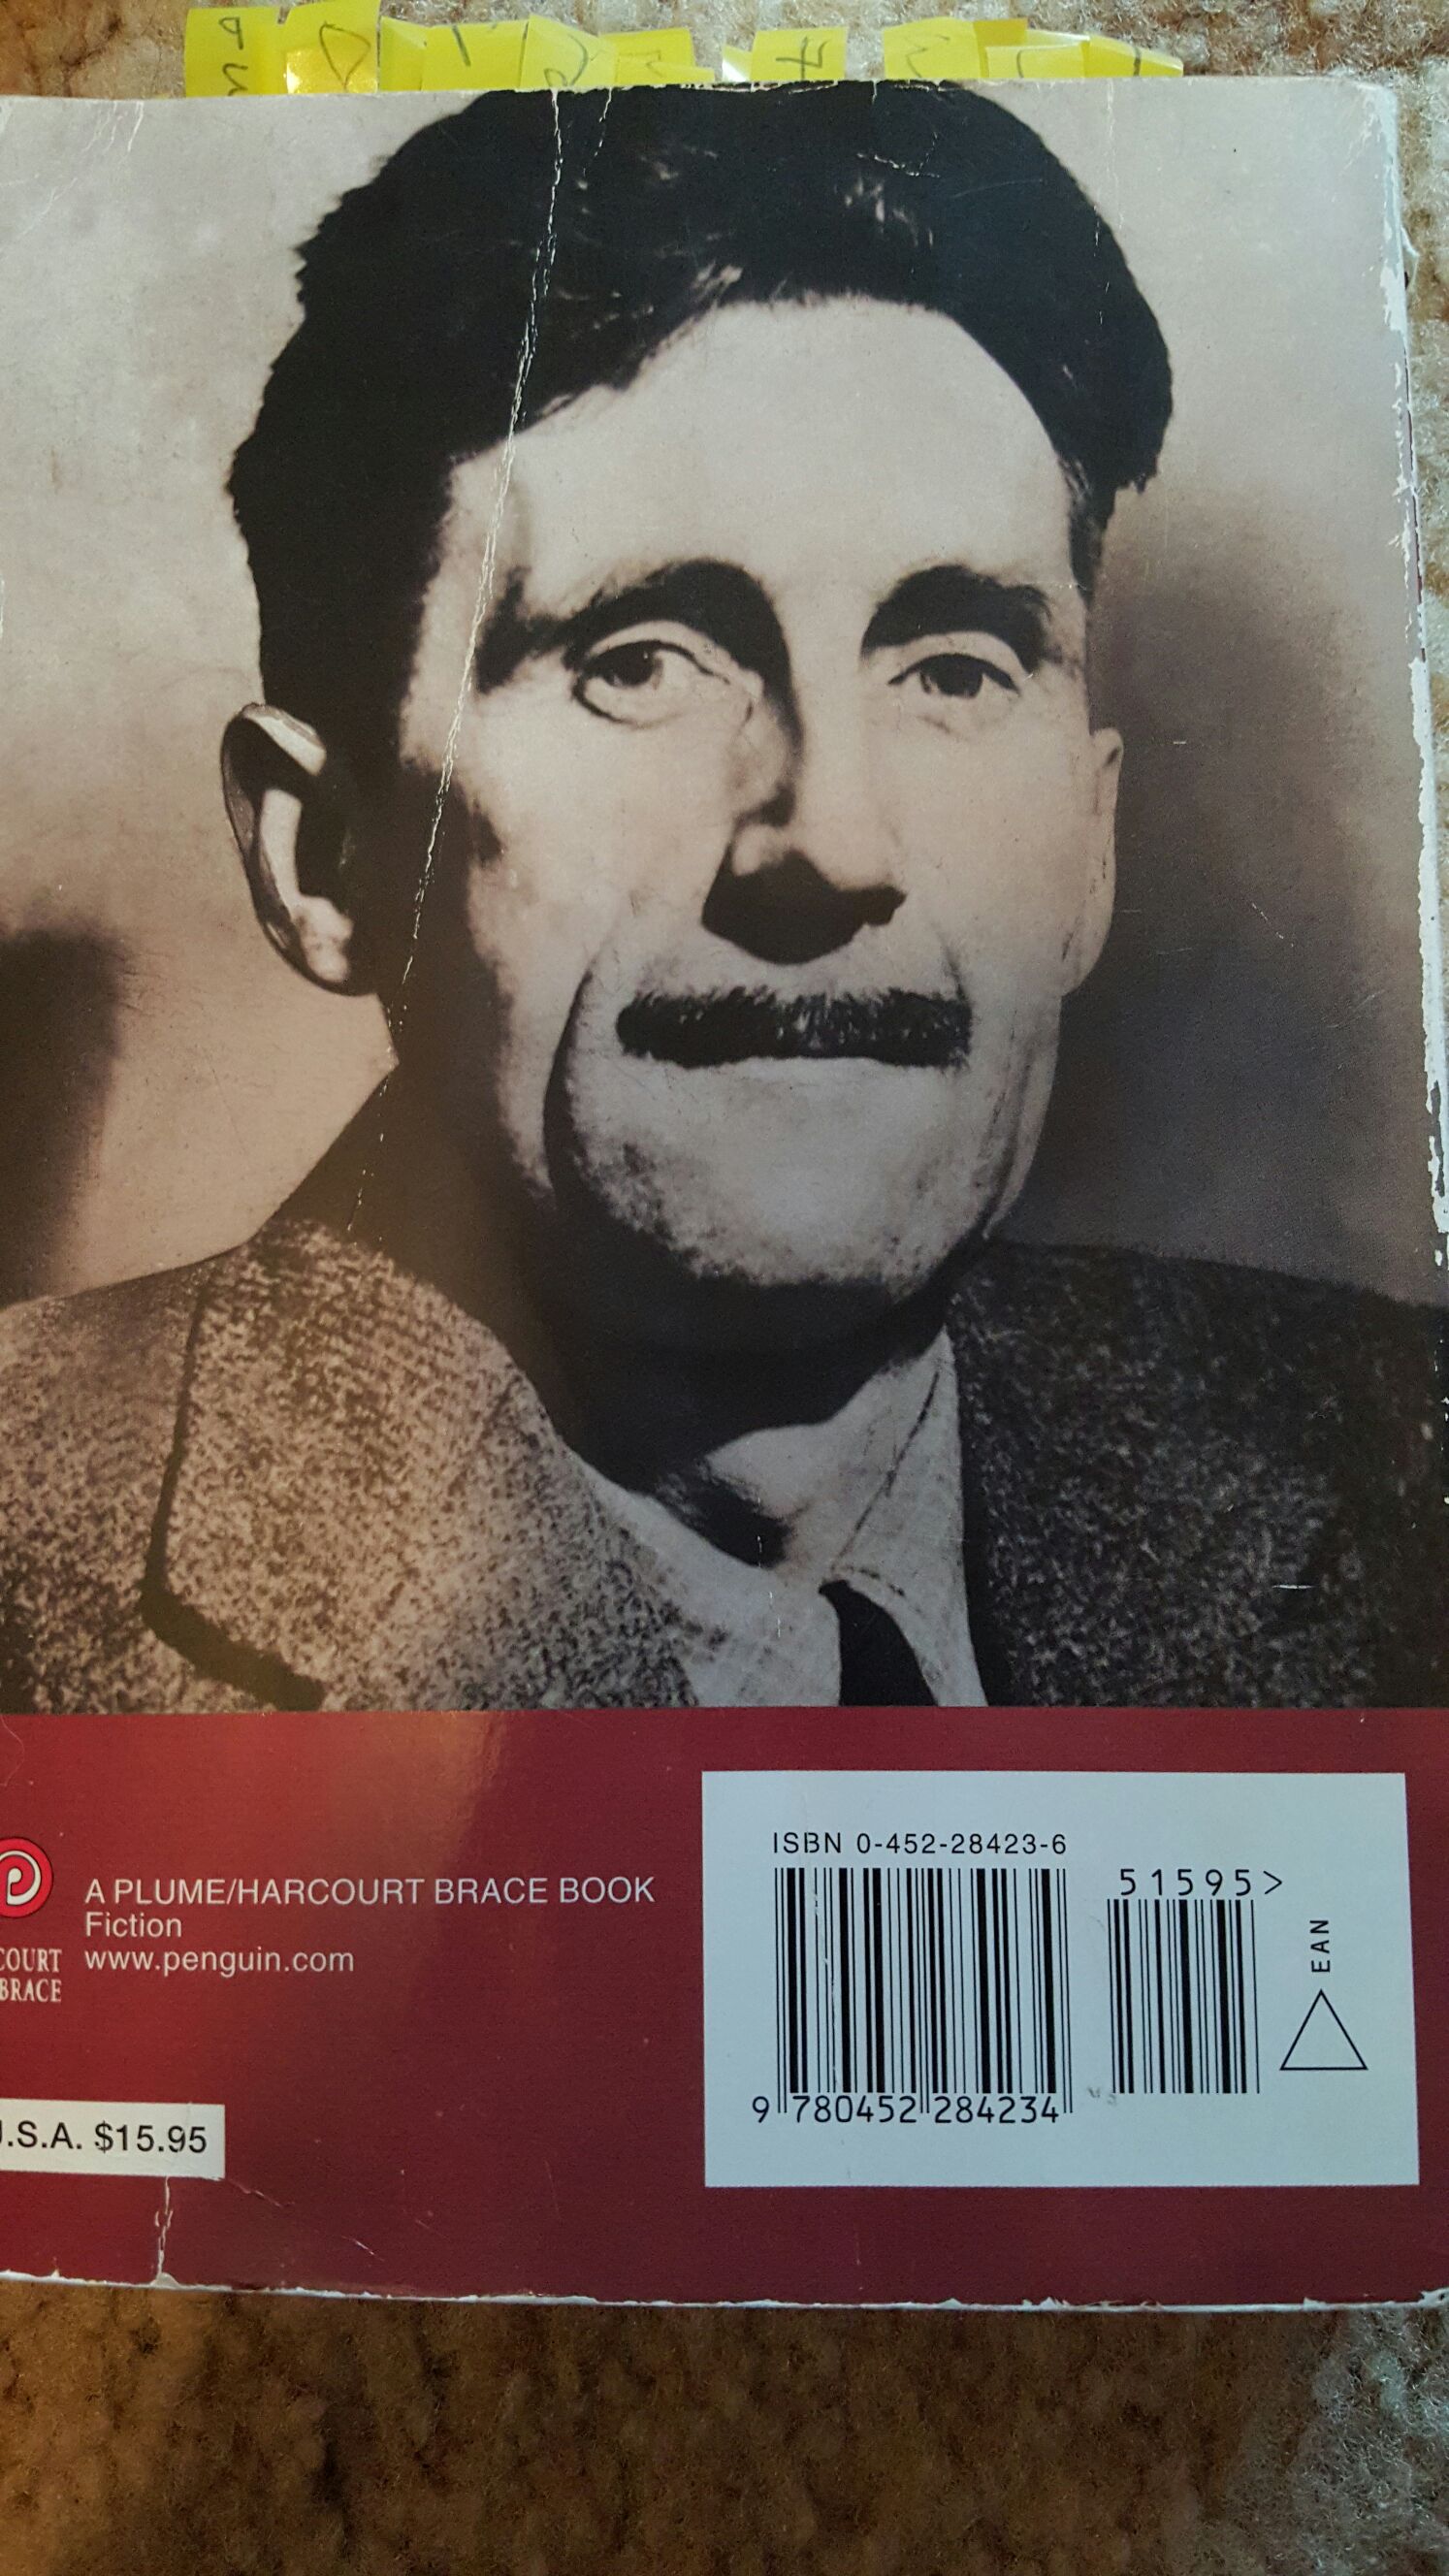 1984 - George Orwell (Penguin Random House - Trade Paperback) book collectible [Barcode 9780452284234] - Main Image 2